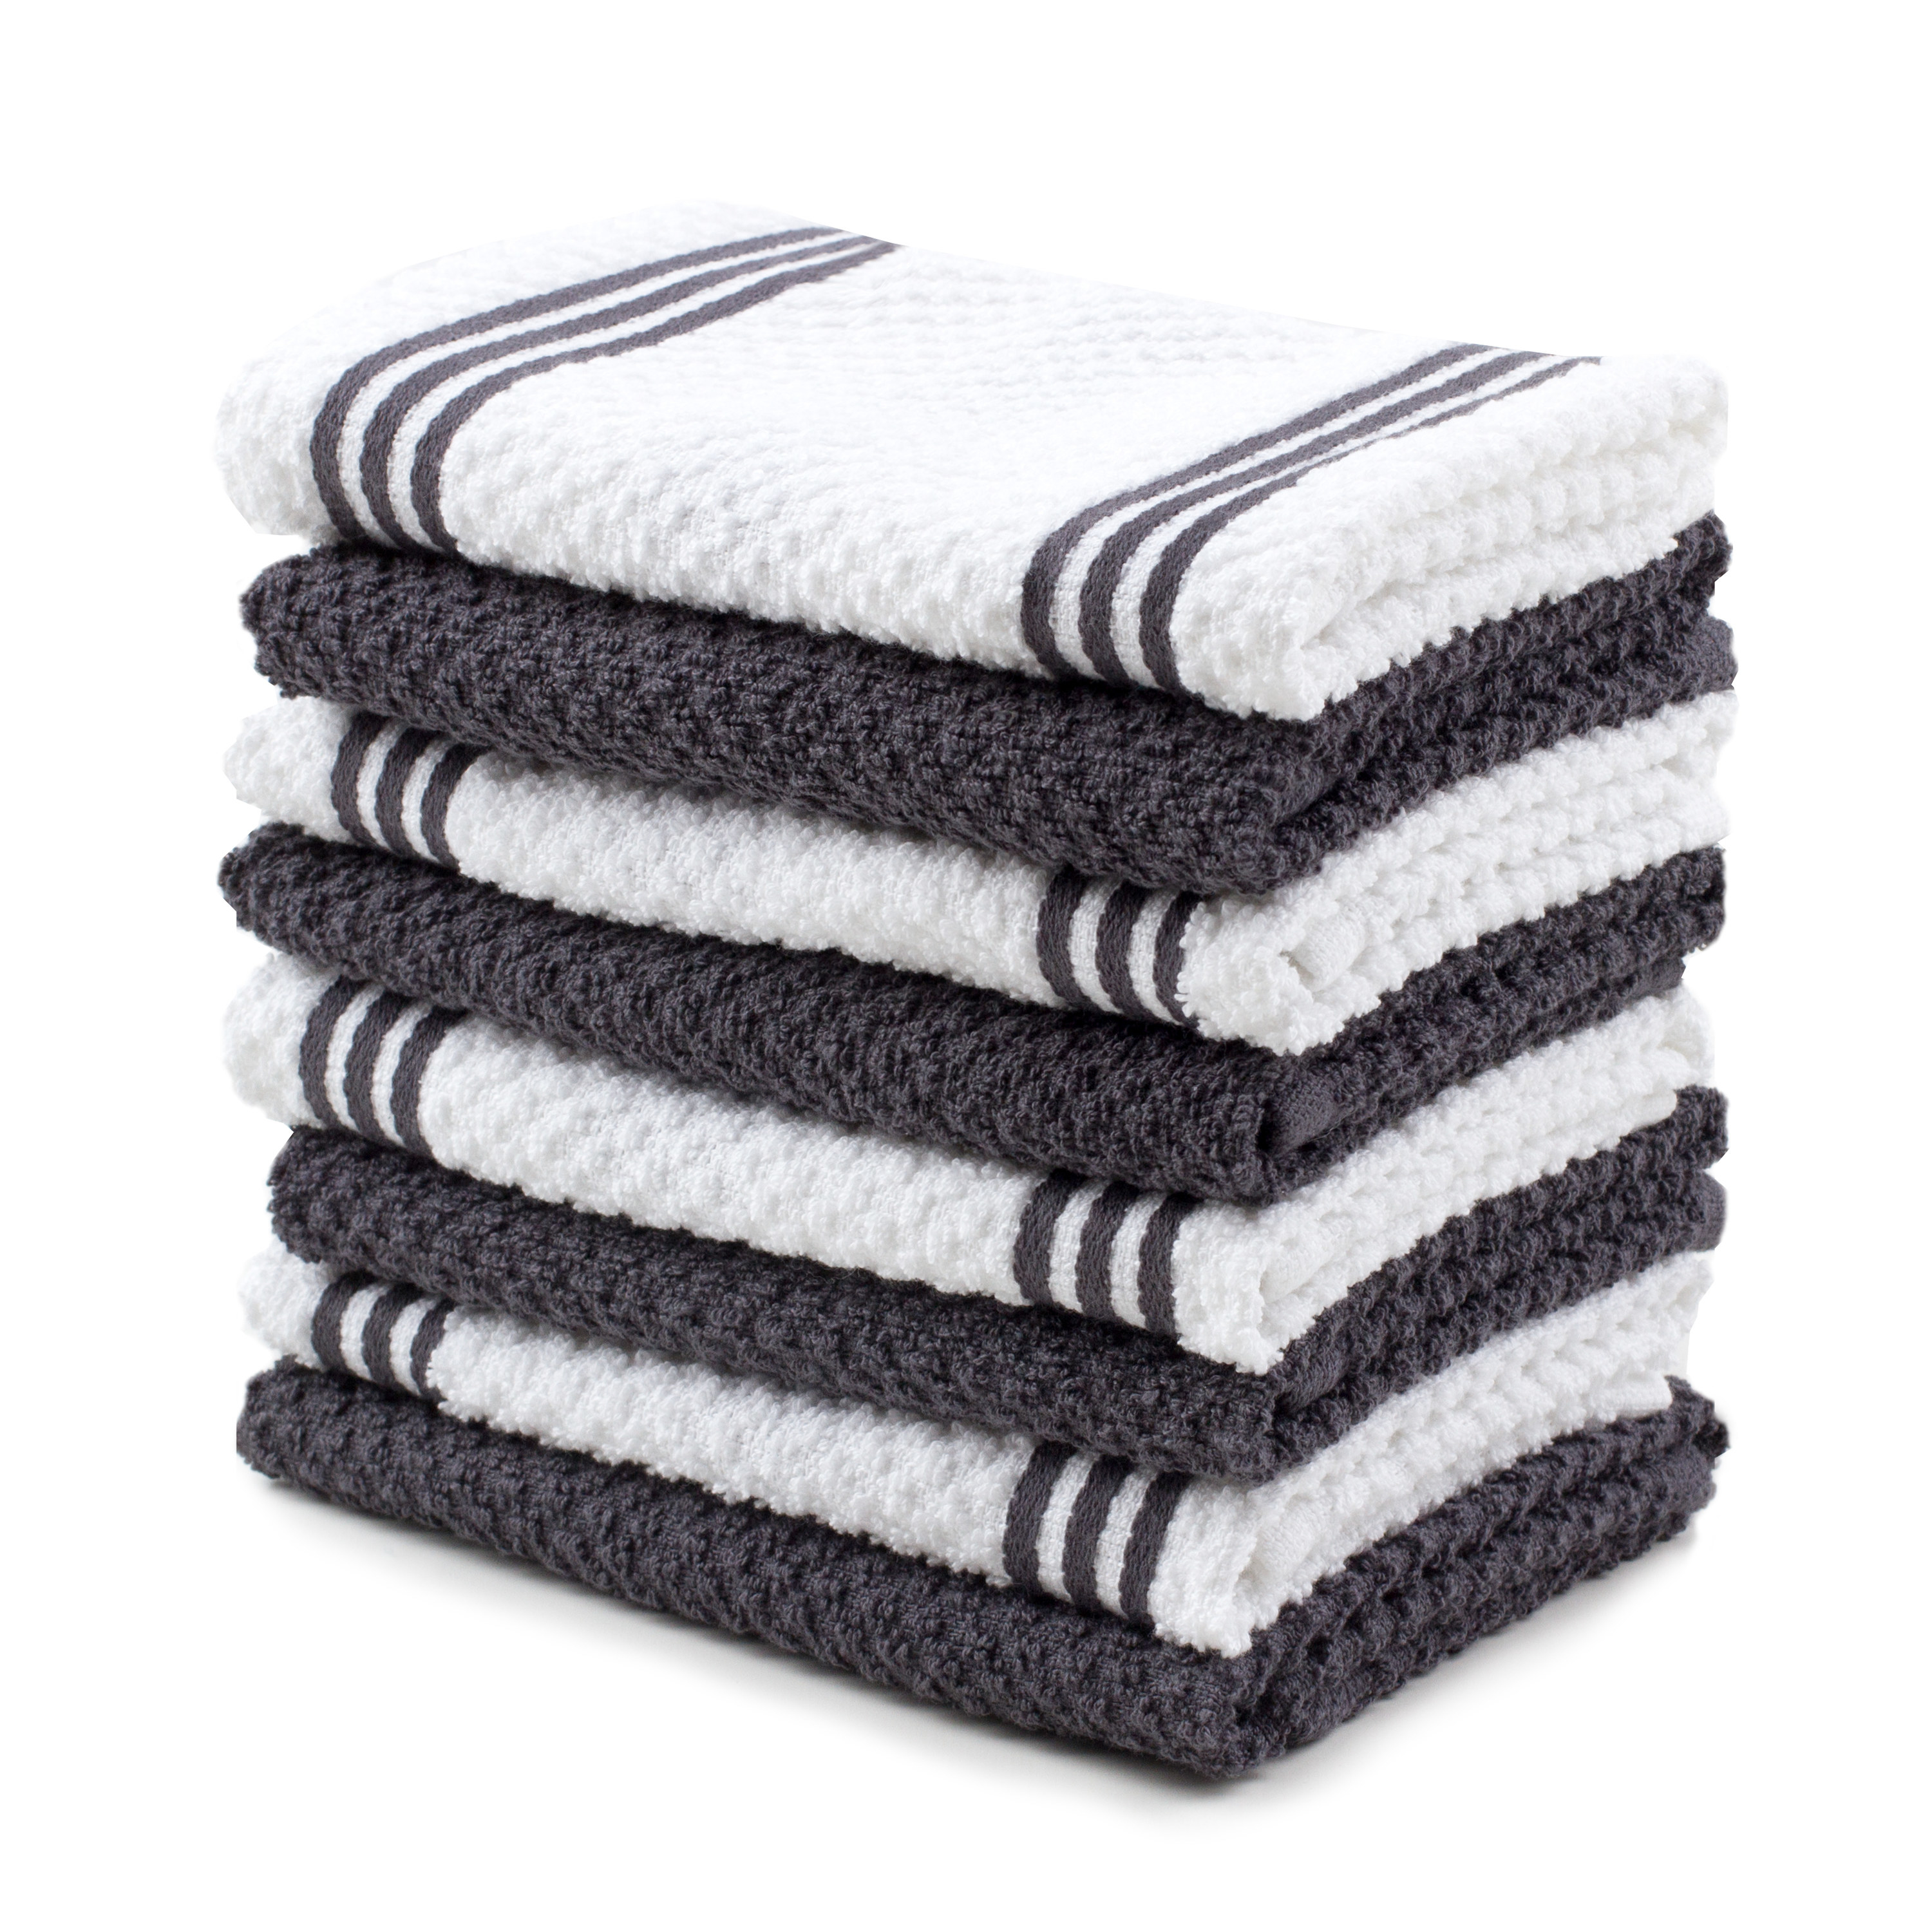 The towels in grey